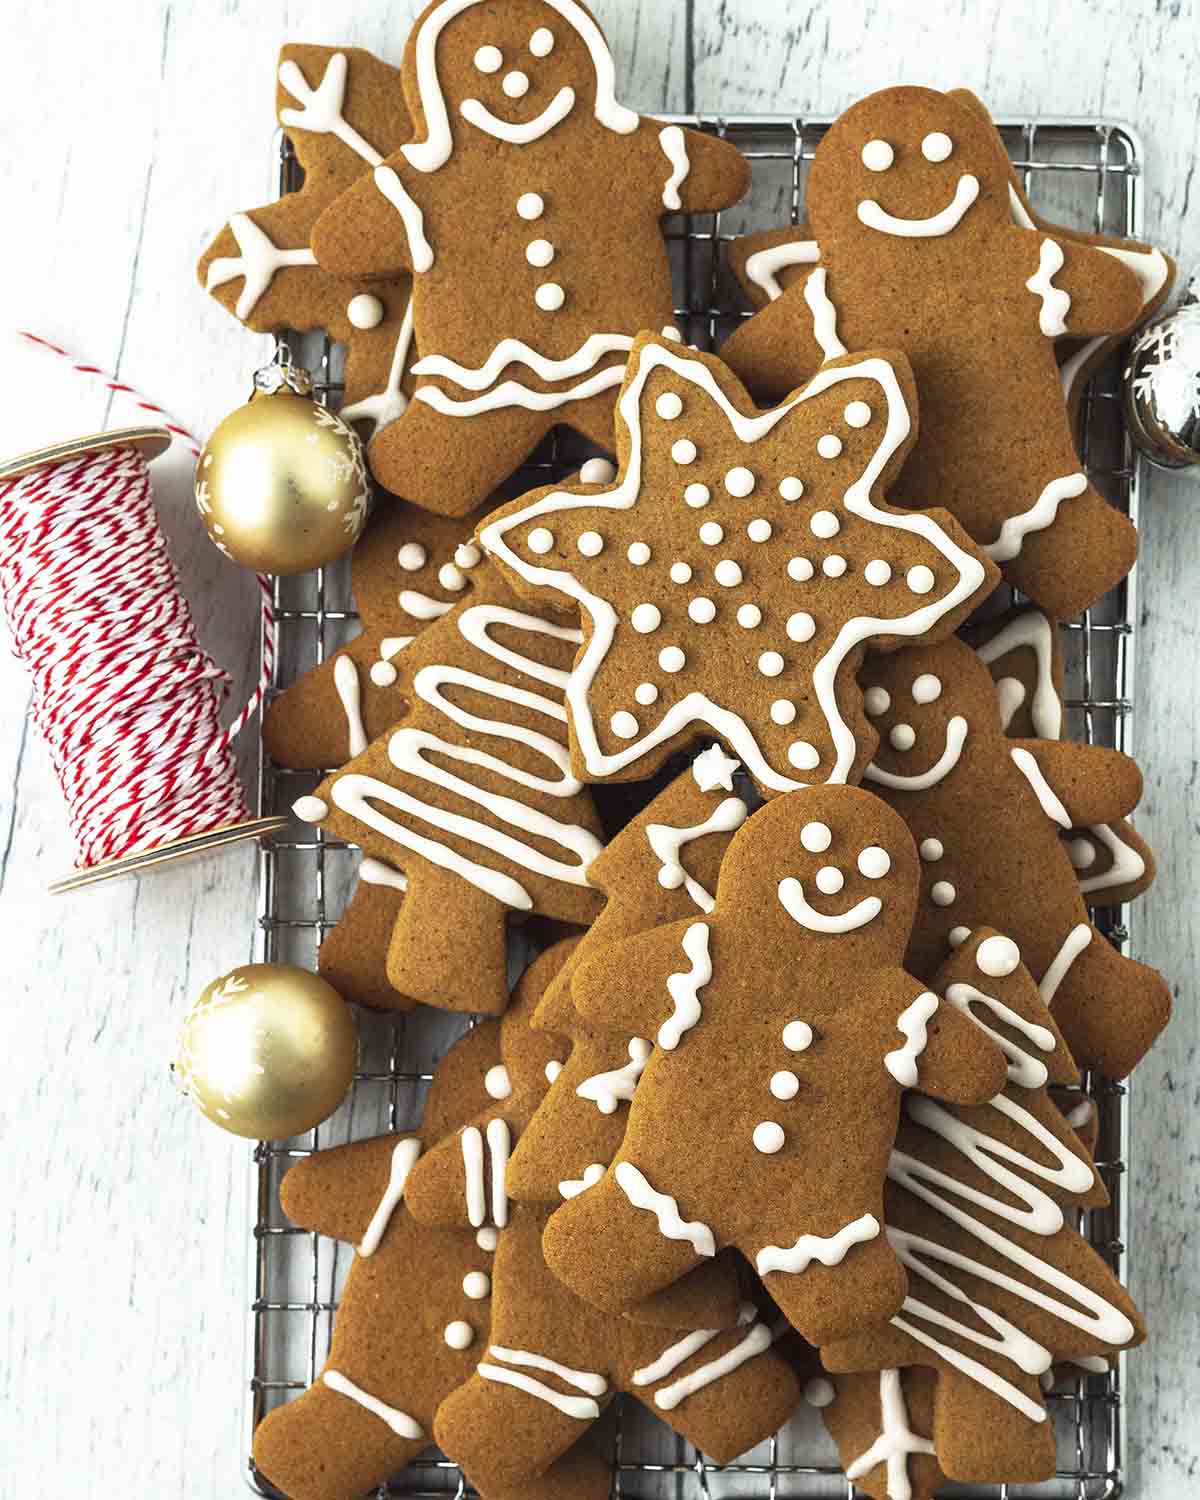 Image shows decorated holiday gingerbread cookies stacked on top of each other on a cooling rack.